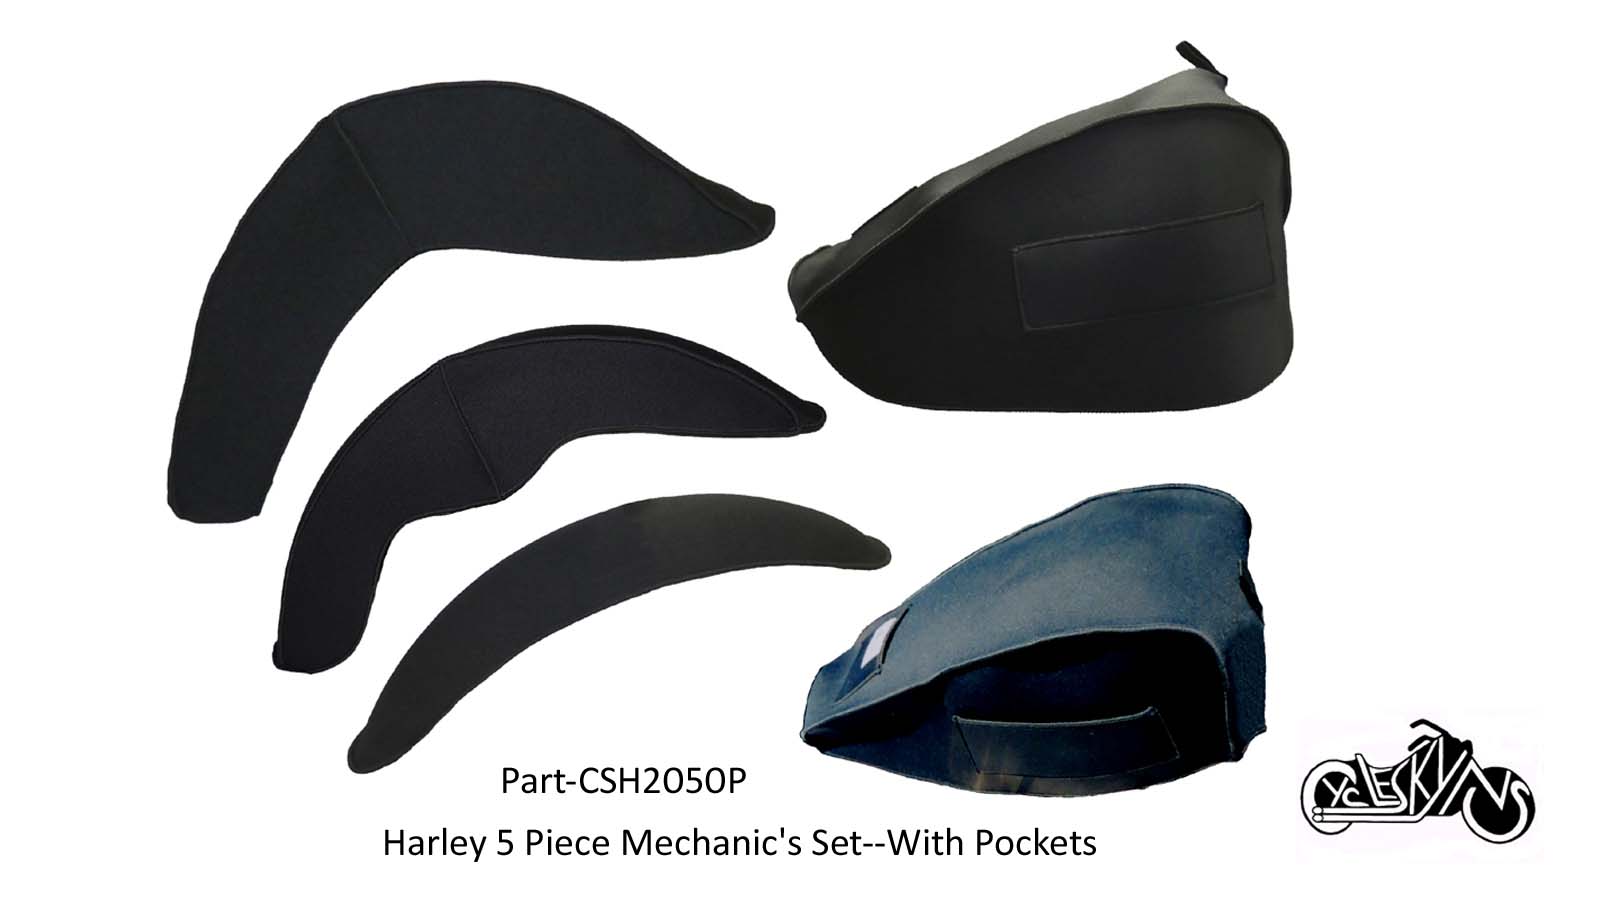 This is a 5 piece mechanic's set of covers including the Fat bob Tank cover, sportster tank cover, the large heritage style fender cover, the fat boy fender cover and the sportster style fender cover. This set has the single top pocket and two side pockets on each of the tank covers.